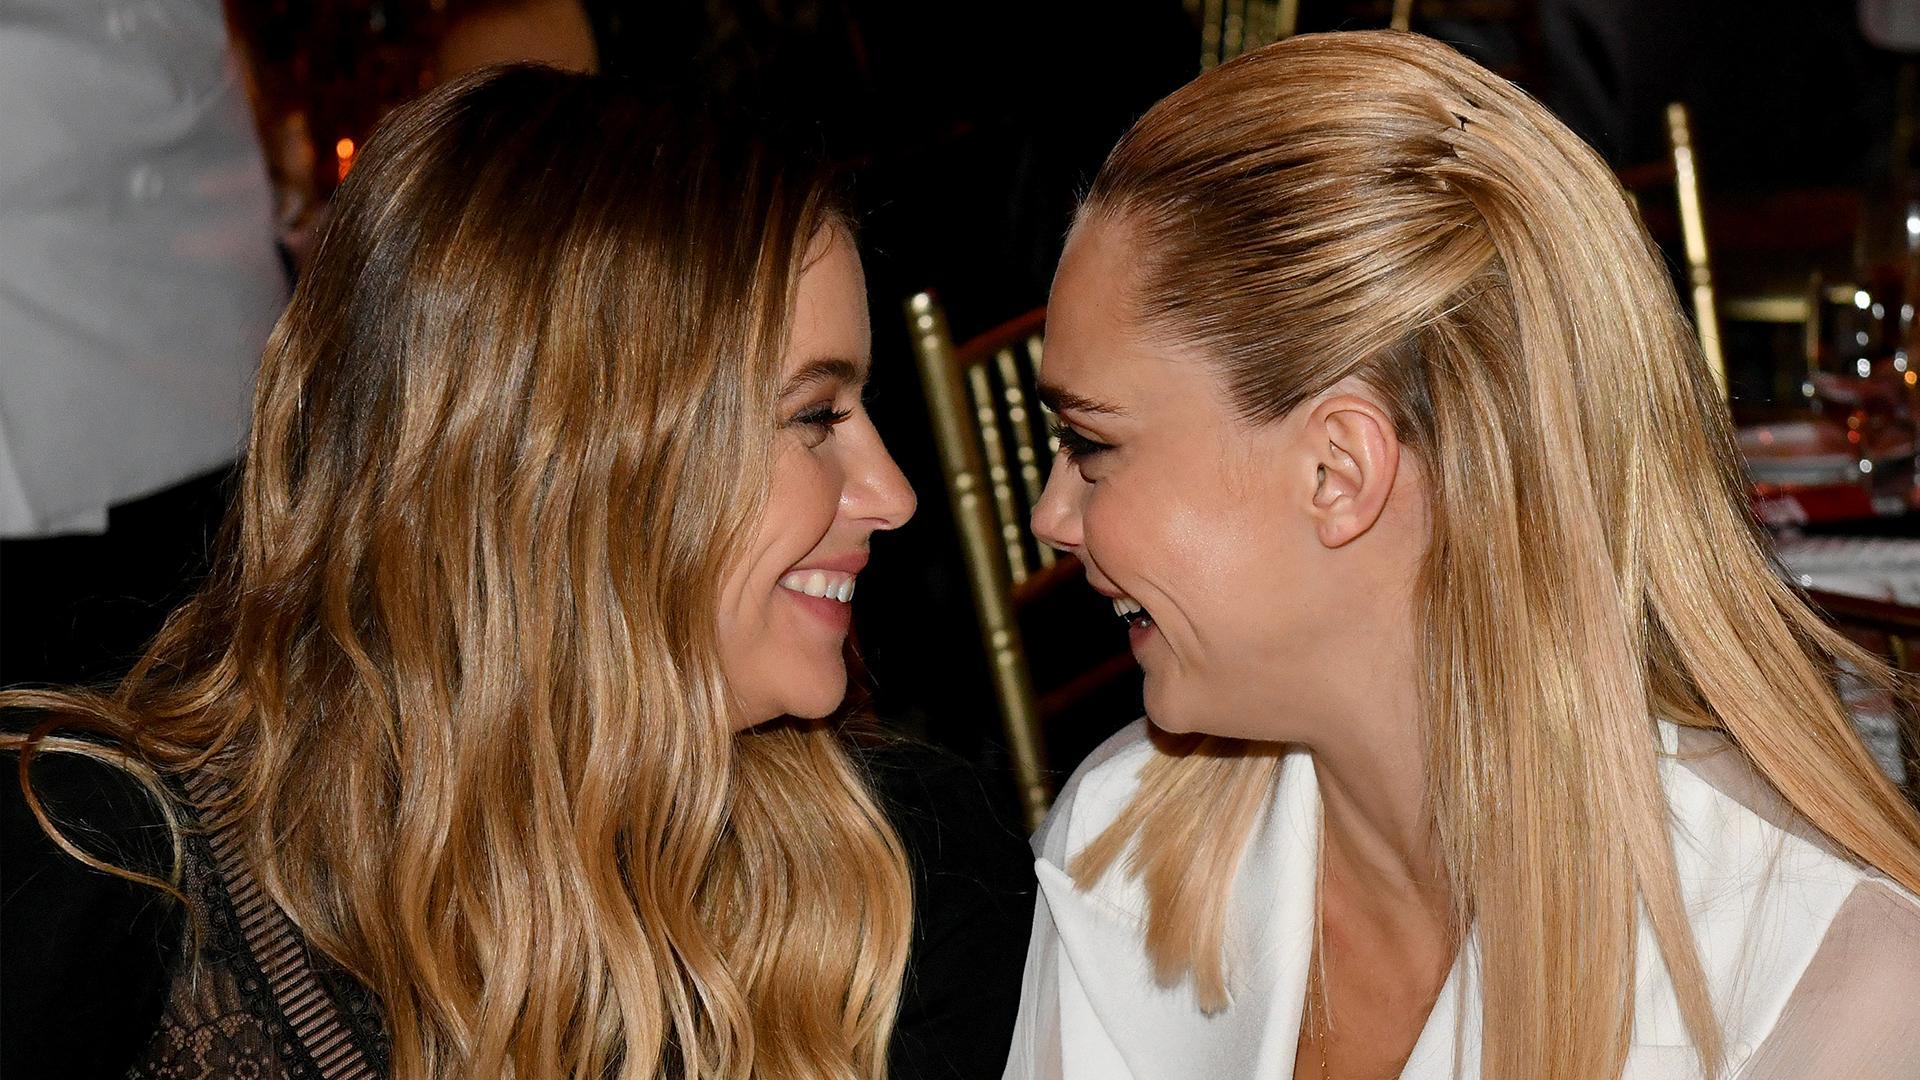 Cara Delevingne Confirms 1 Year Relationship With Ashley Benson At